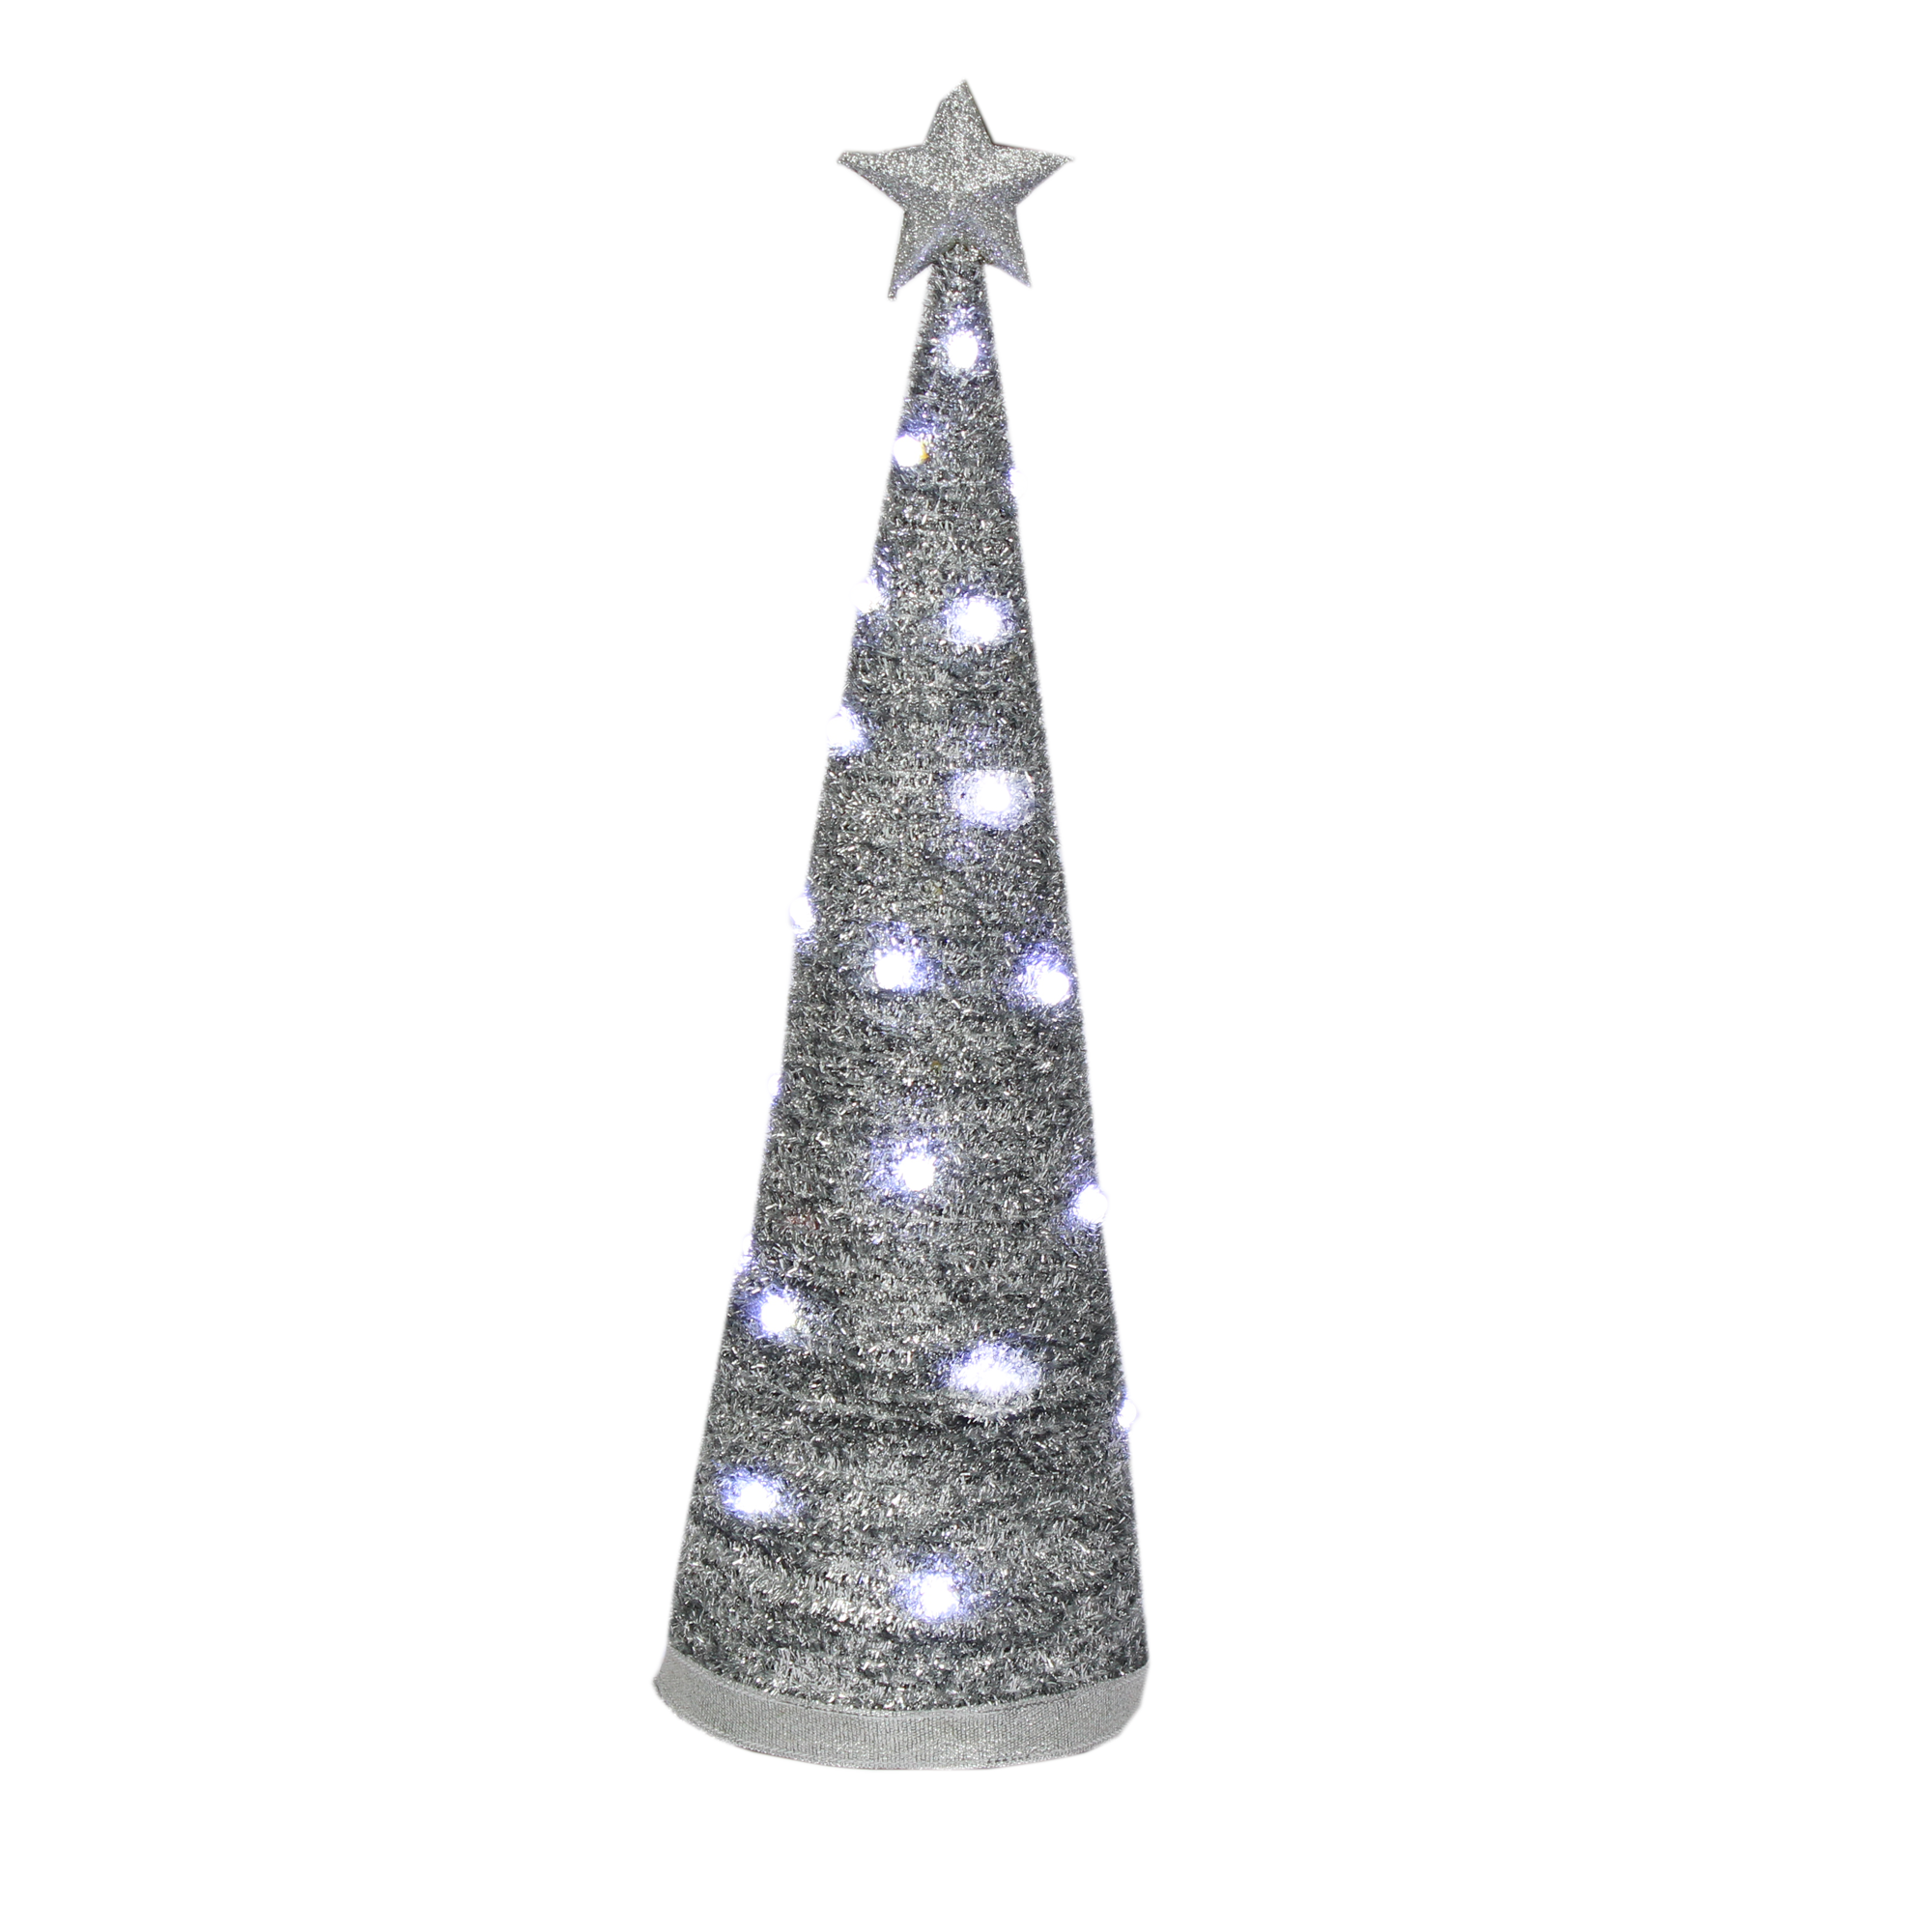 Handmade Conical Christmas Tinsel Tree with LED Light - 14.5 X 4inch, Silver, 1pc